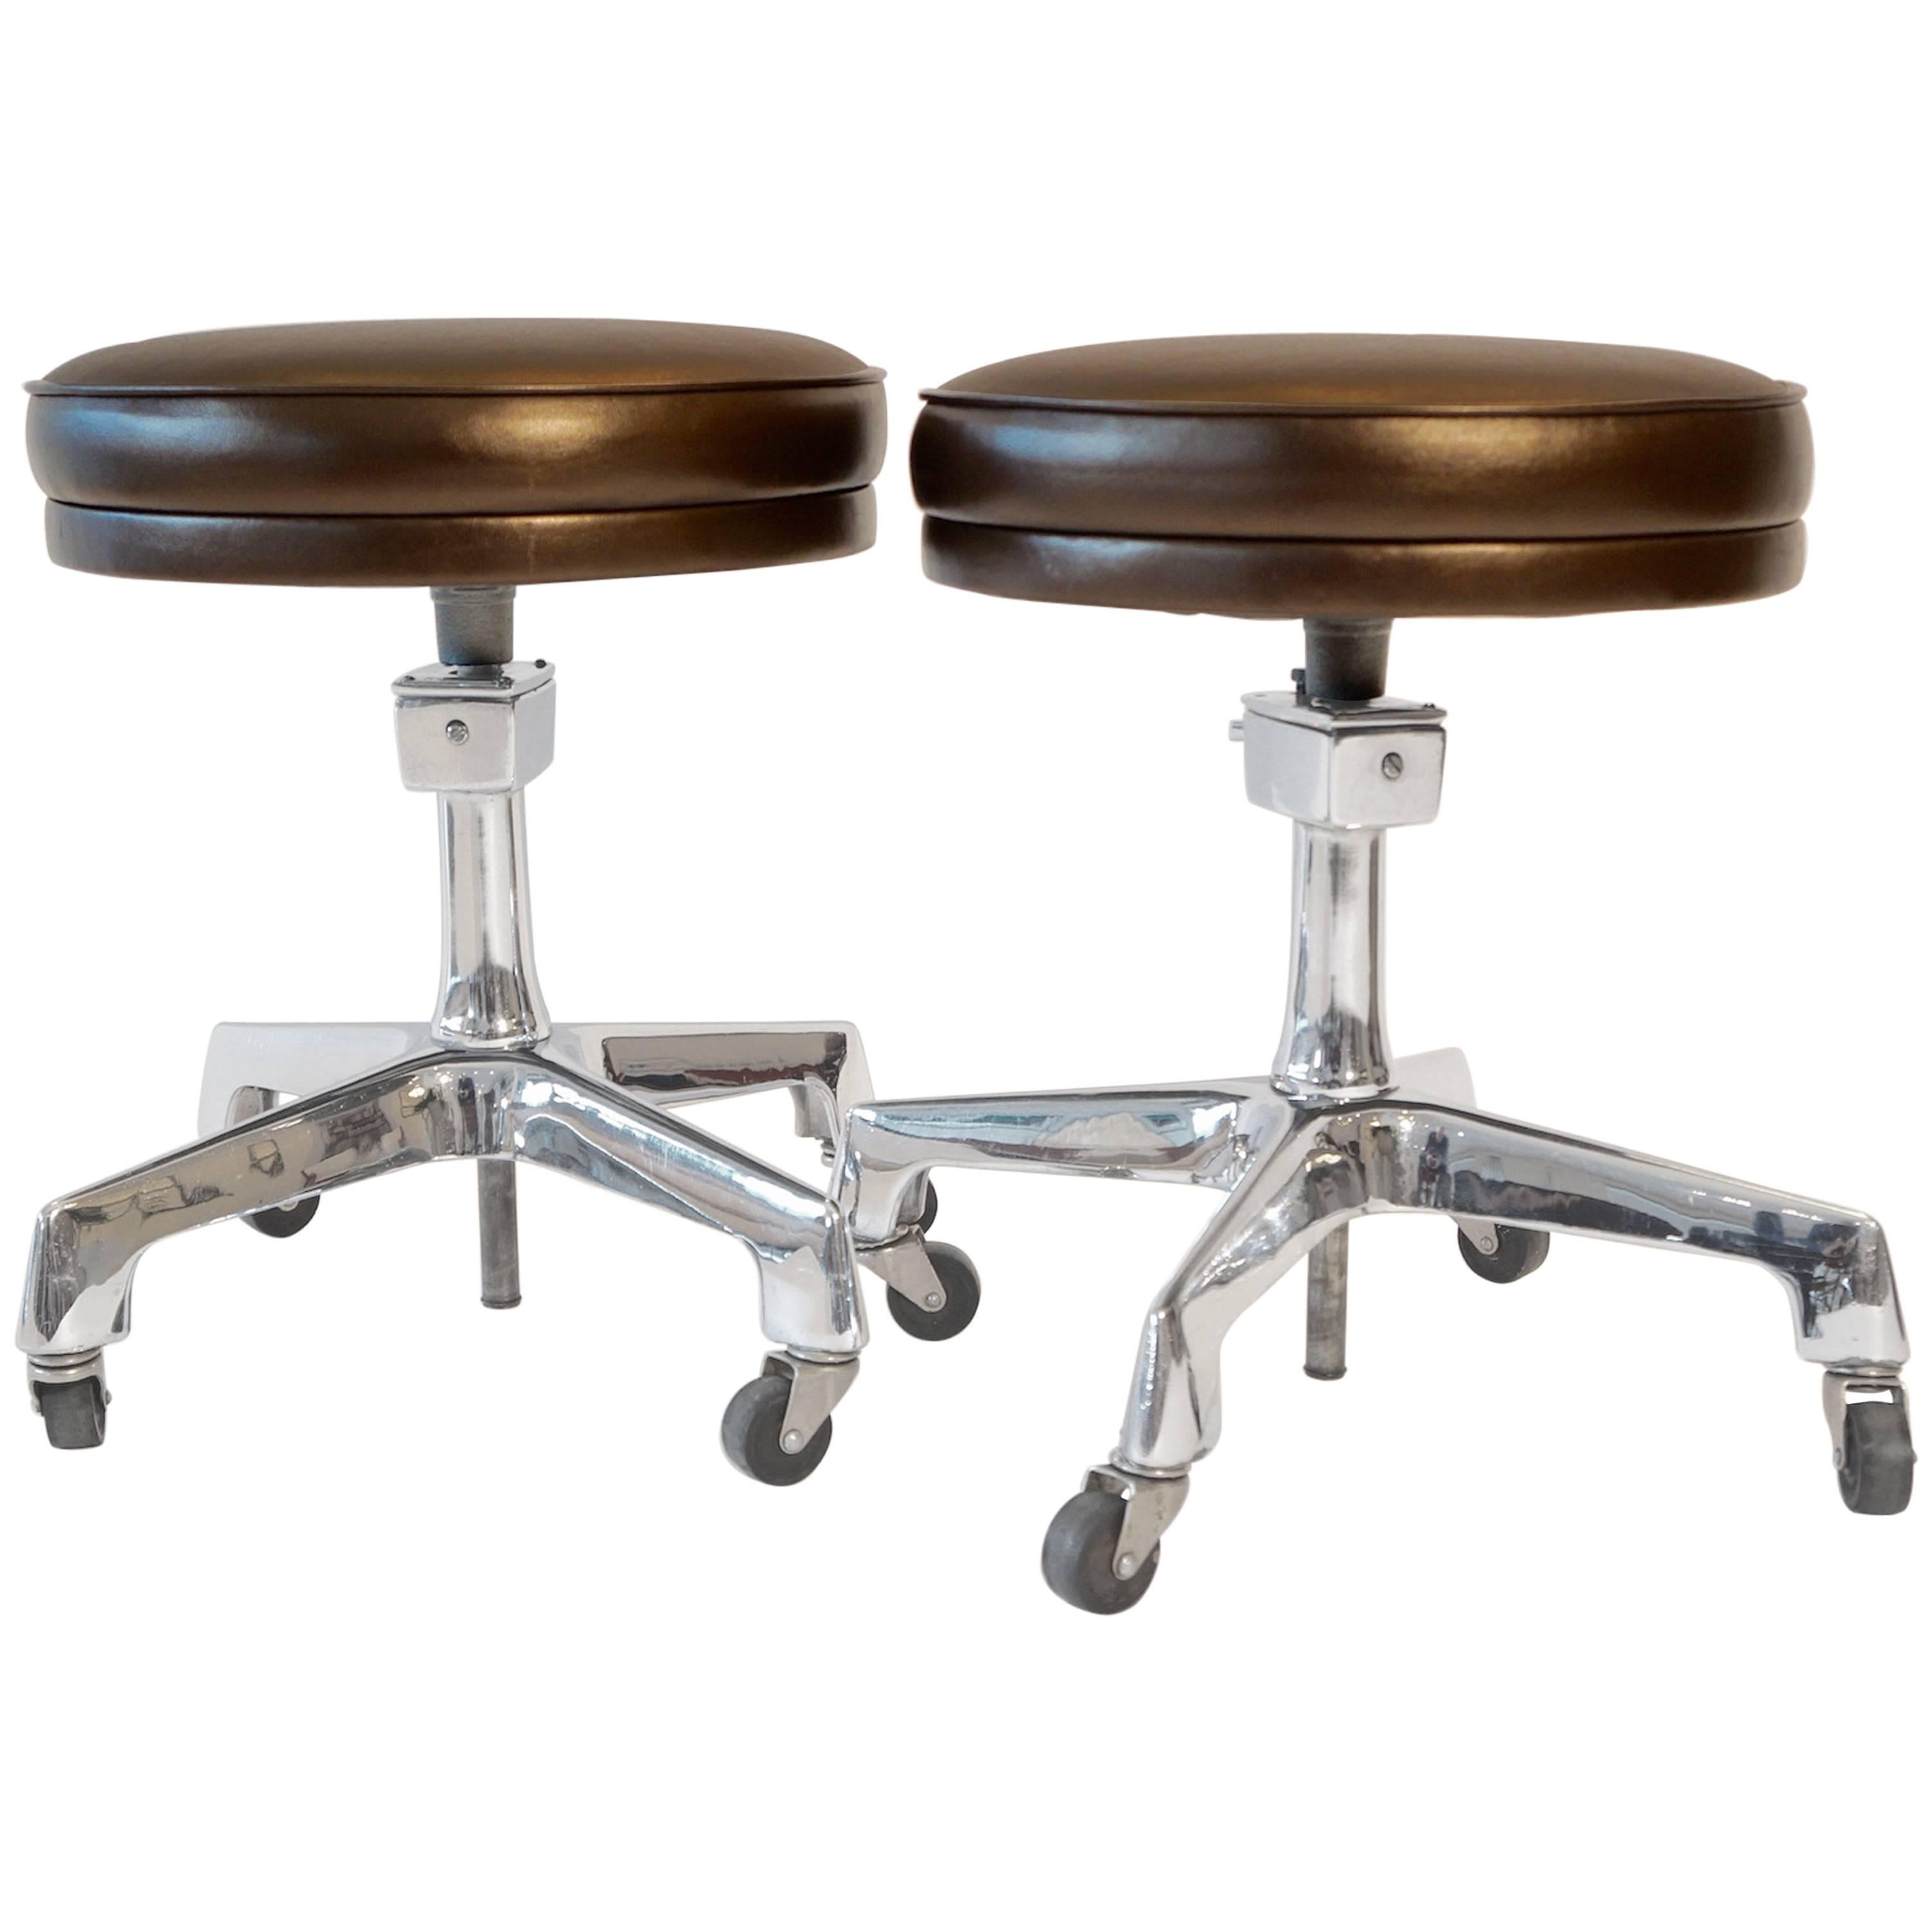 Two Reliance Industrial Stools For Sale